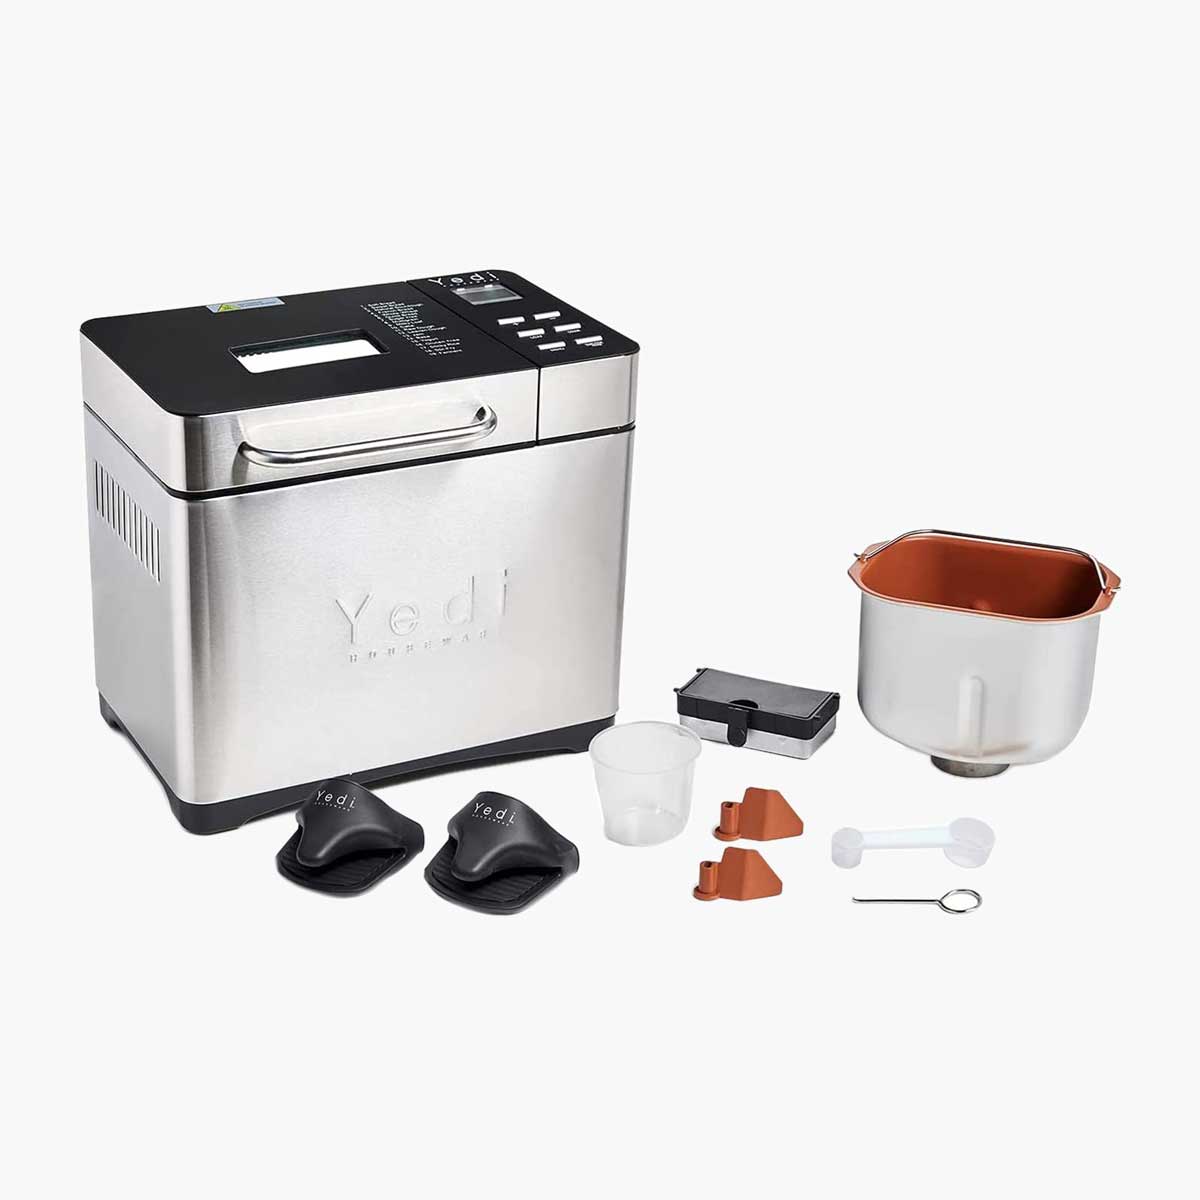 A Yedi breadmaker and its parts, one of Oprah's 12 favorite kitchen gifts for 2021.